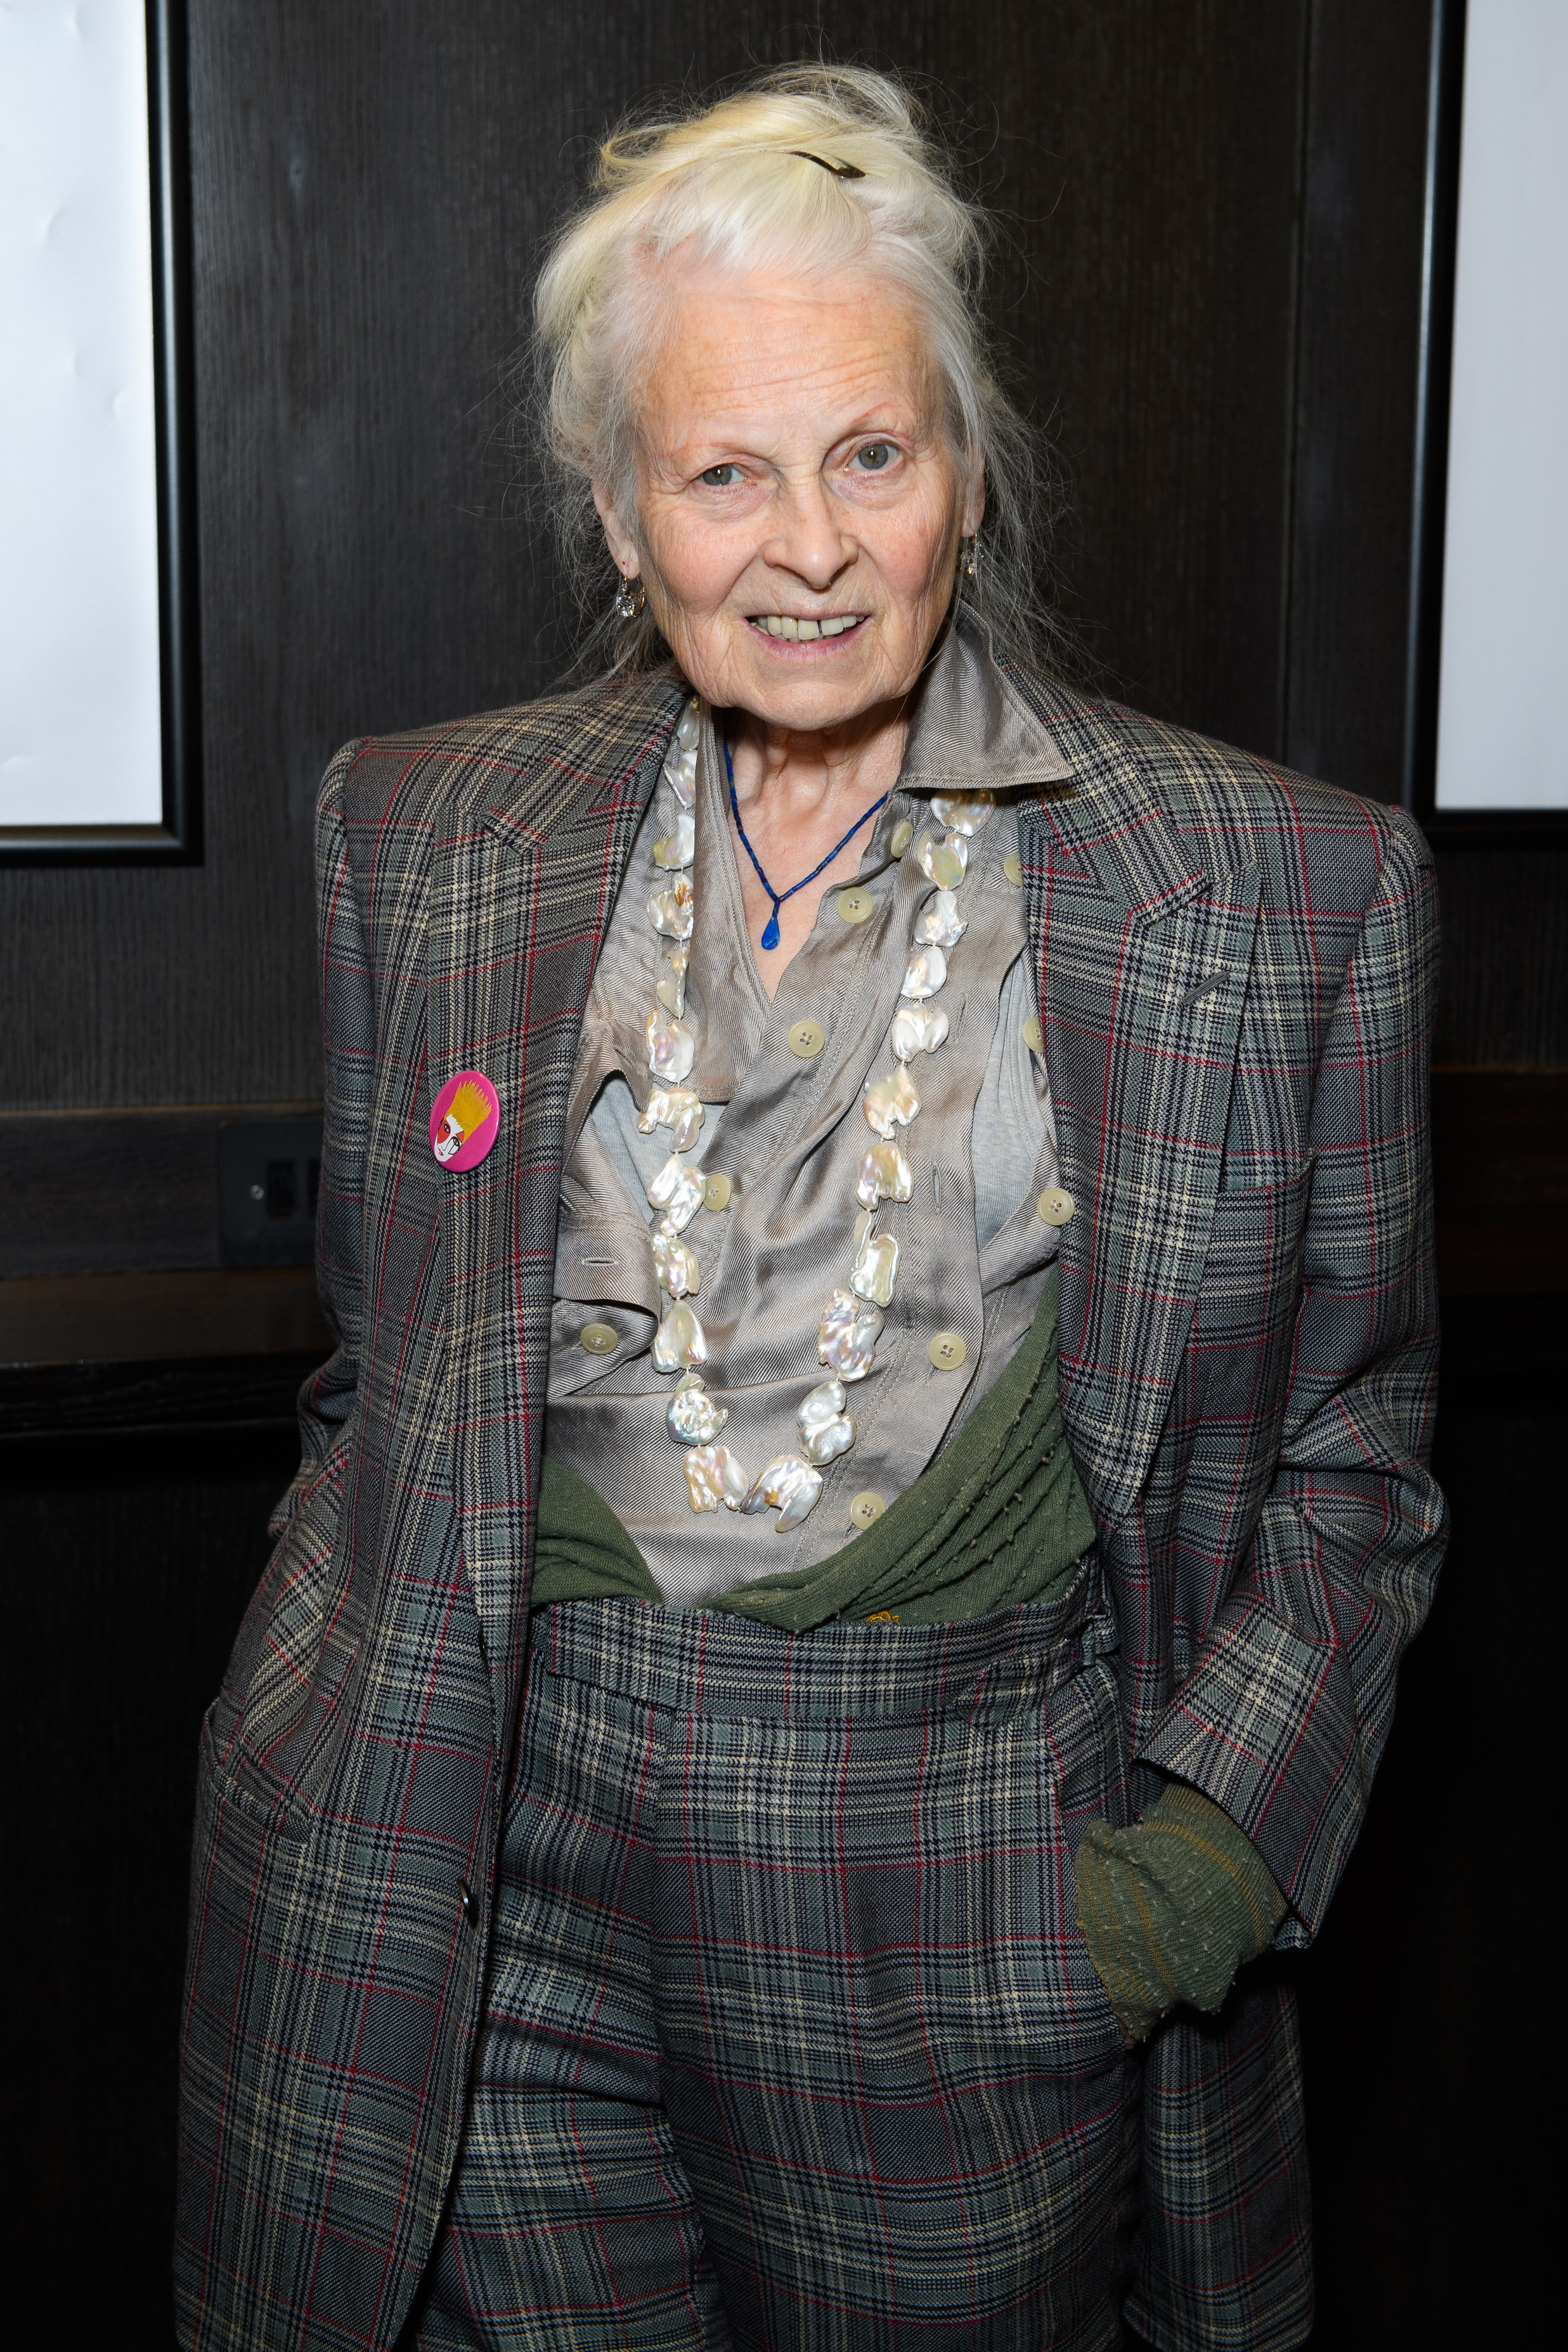 Vivienne Westwood, punk queen turned fashion dame, dies at 81